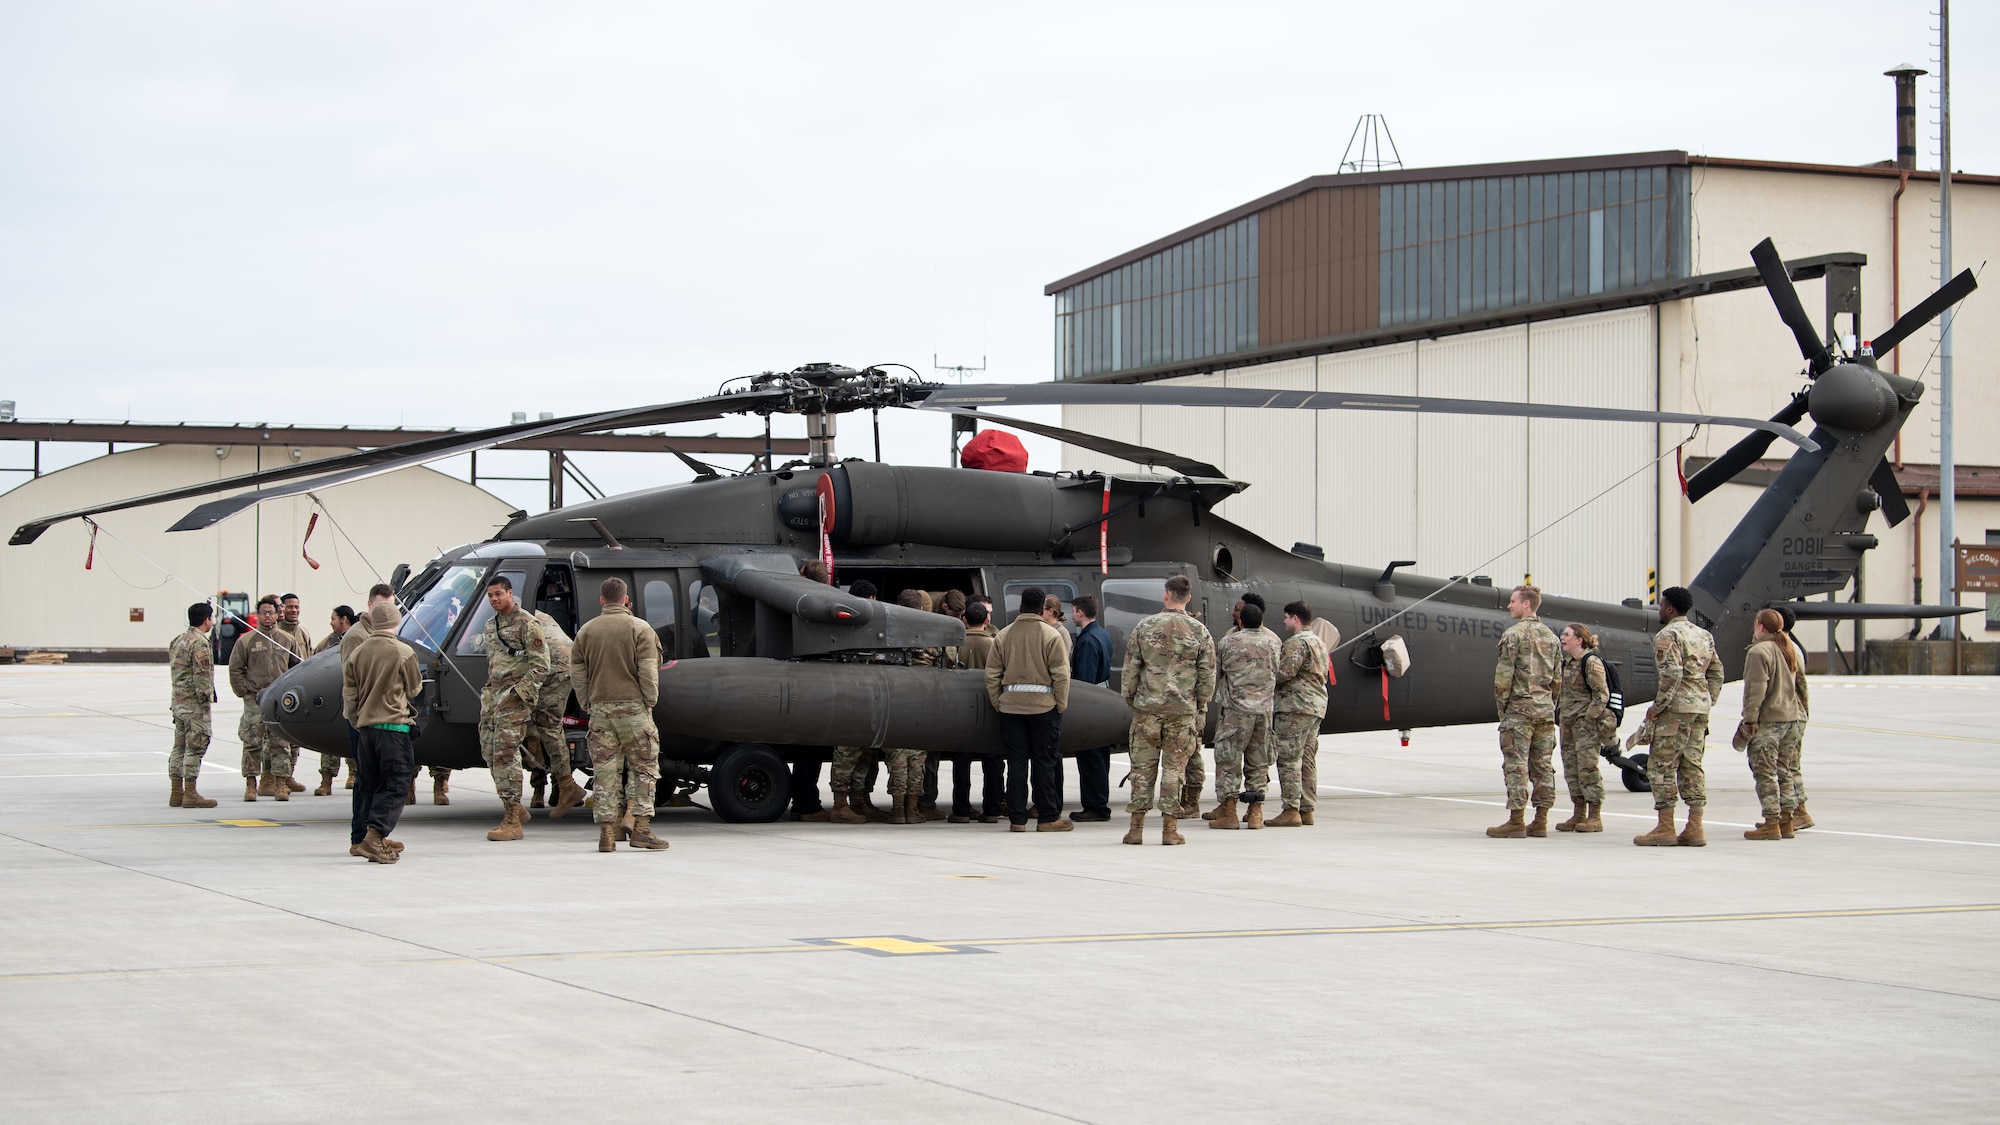 People look at U.S. Army helicopters